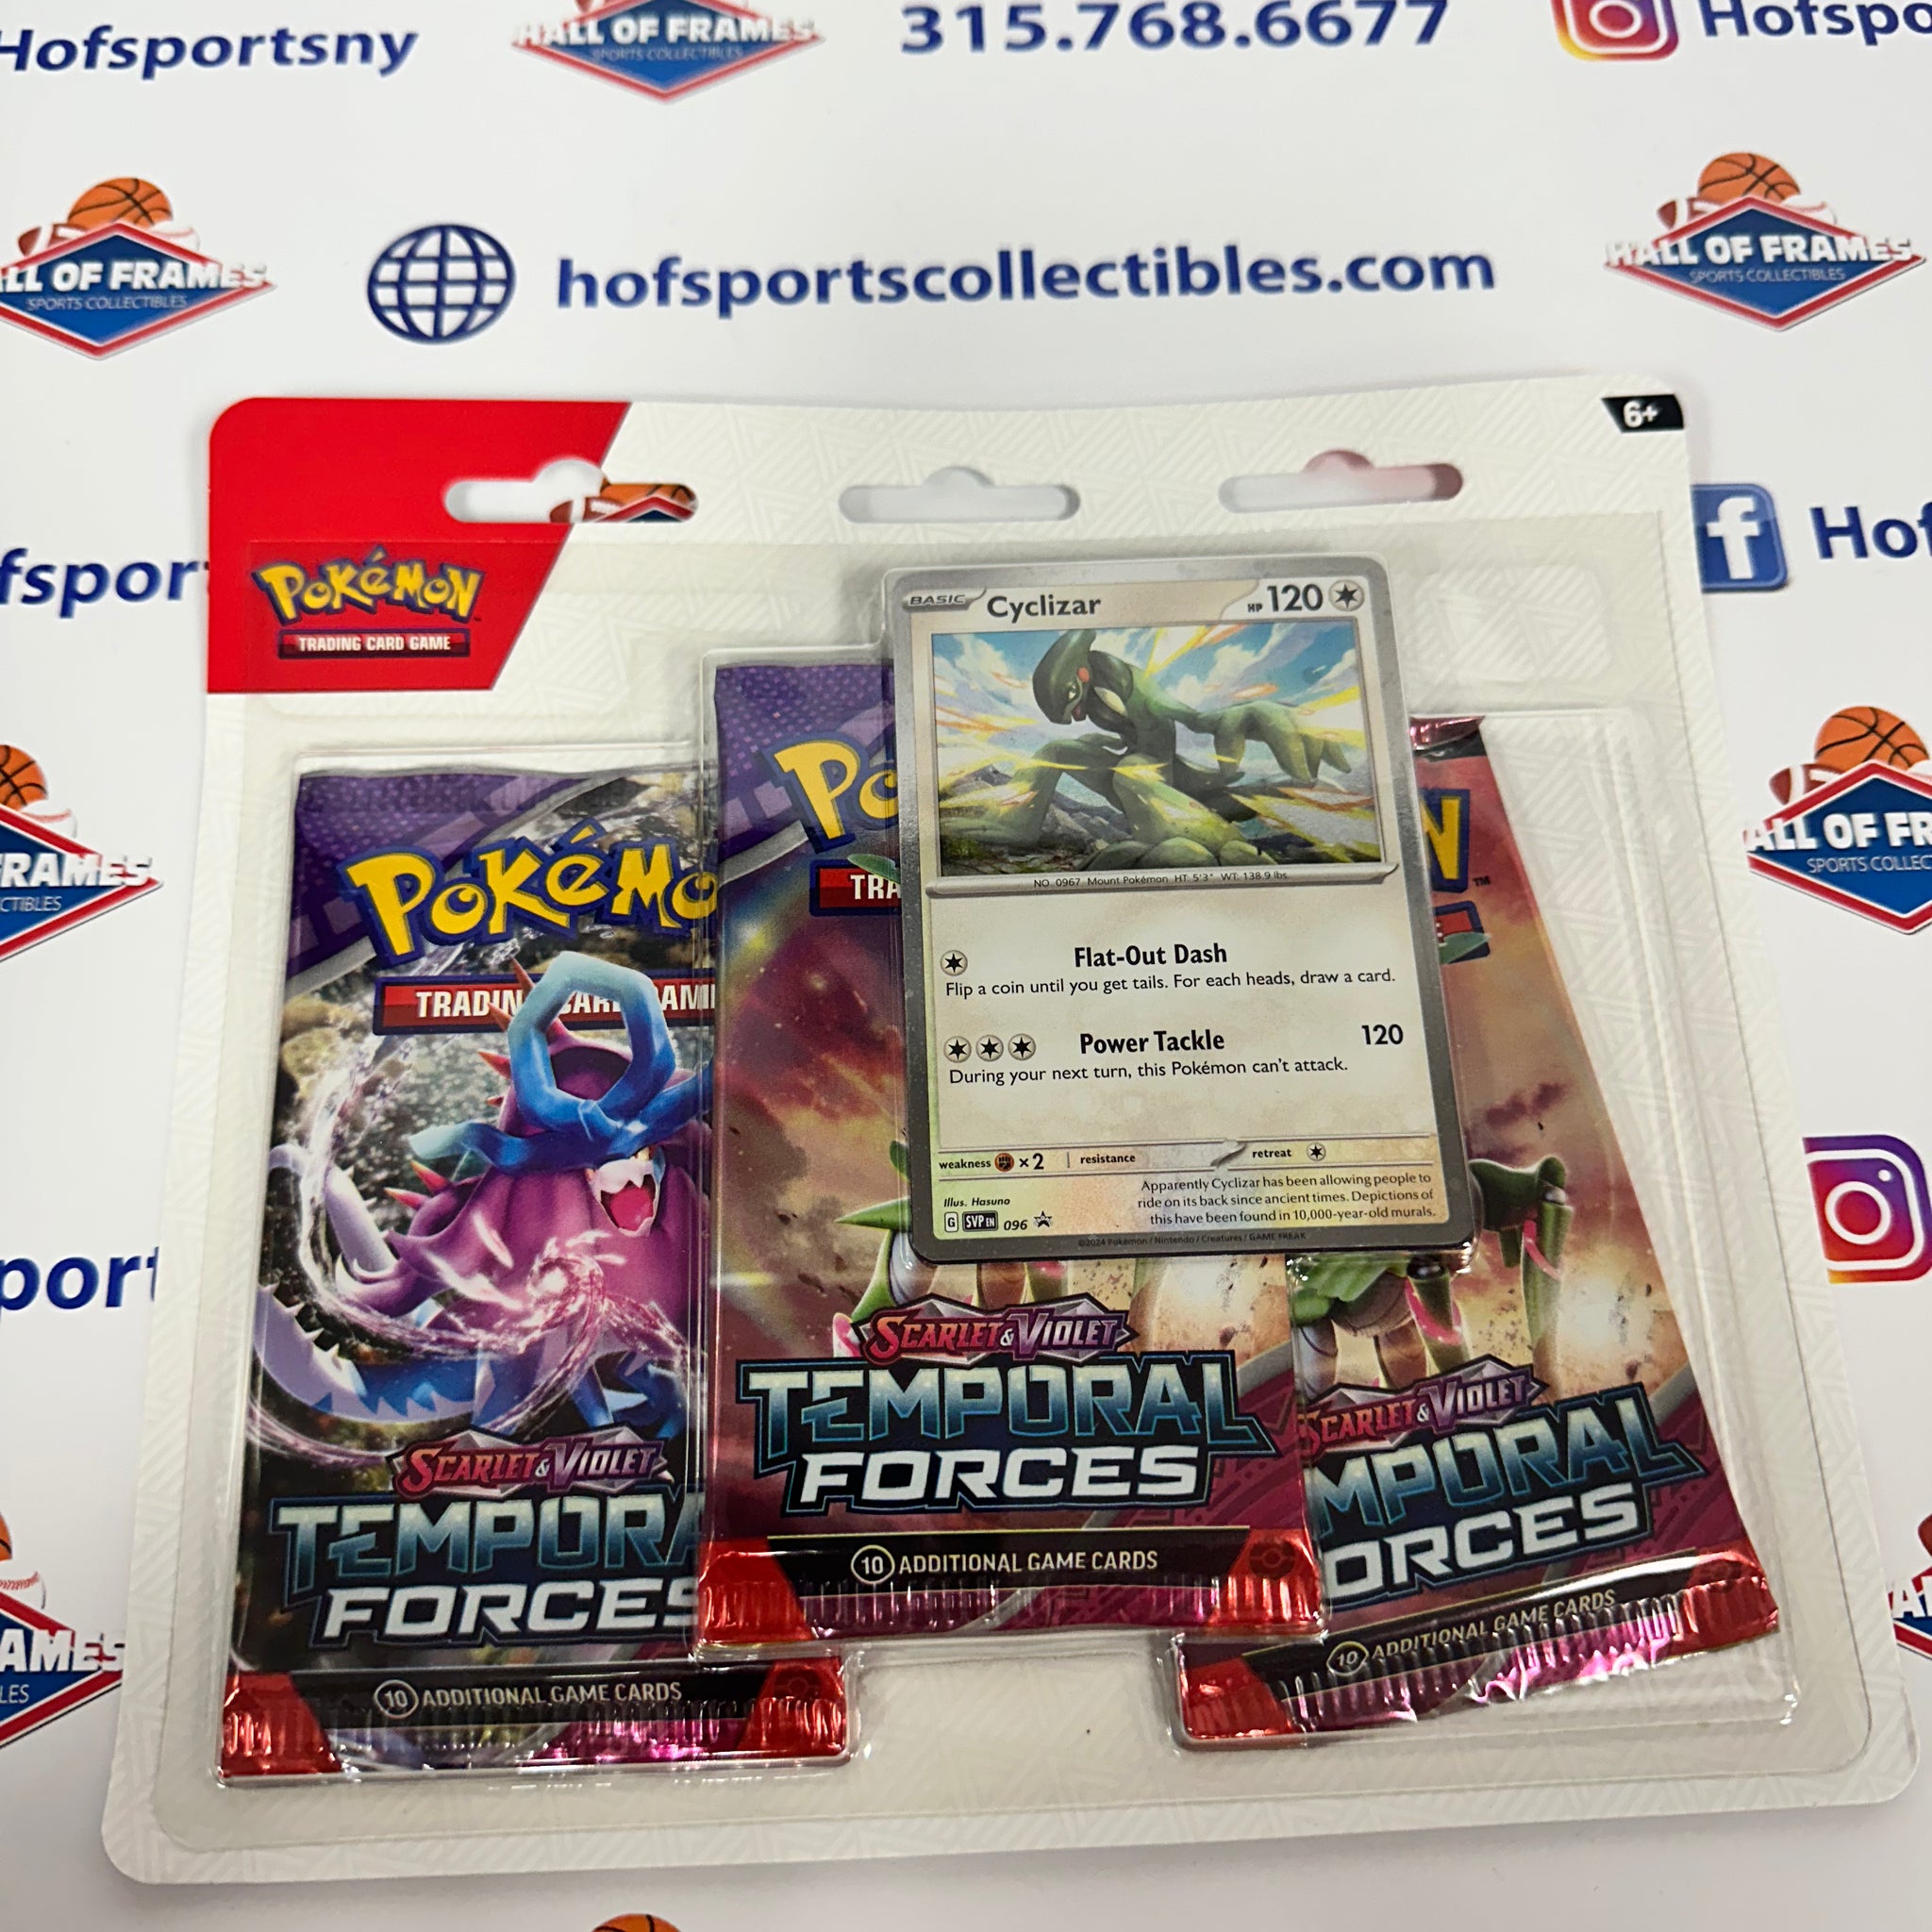 POKEMON TEMPORAL FORCES BLISTER 3 PACK! CYCLIZAR PROMO!